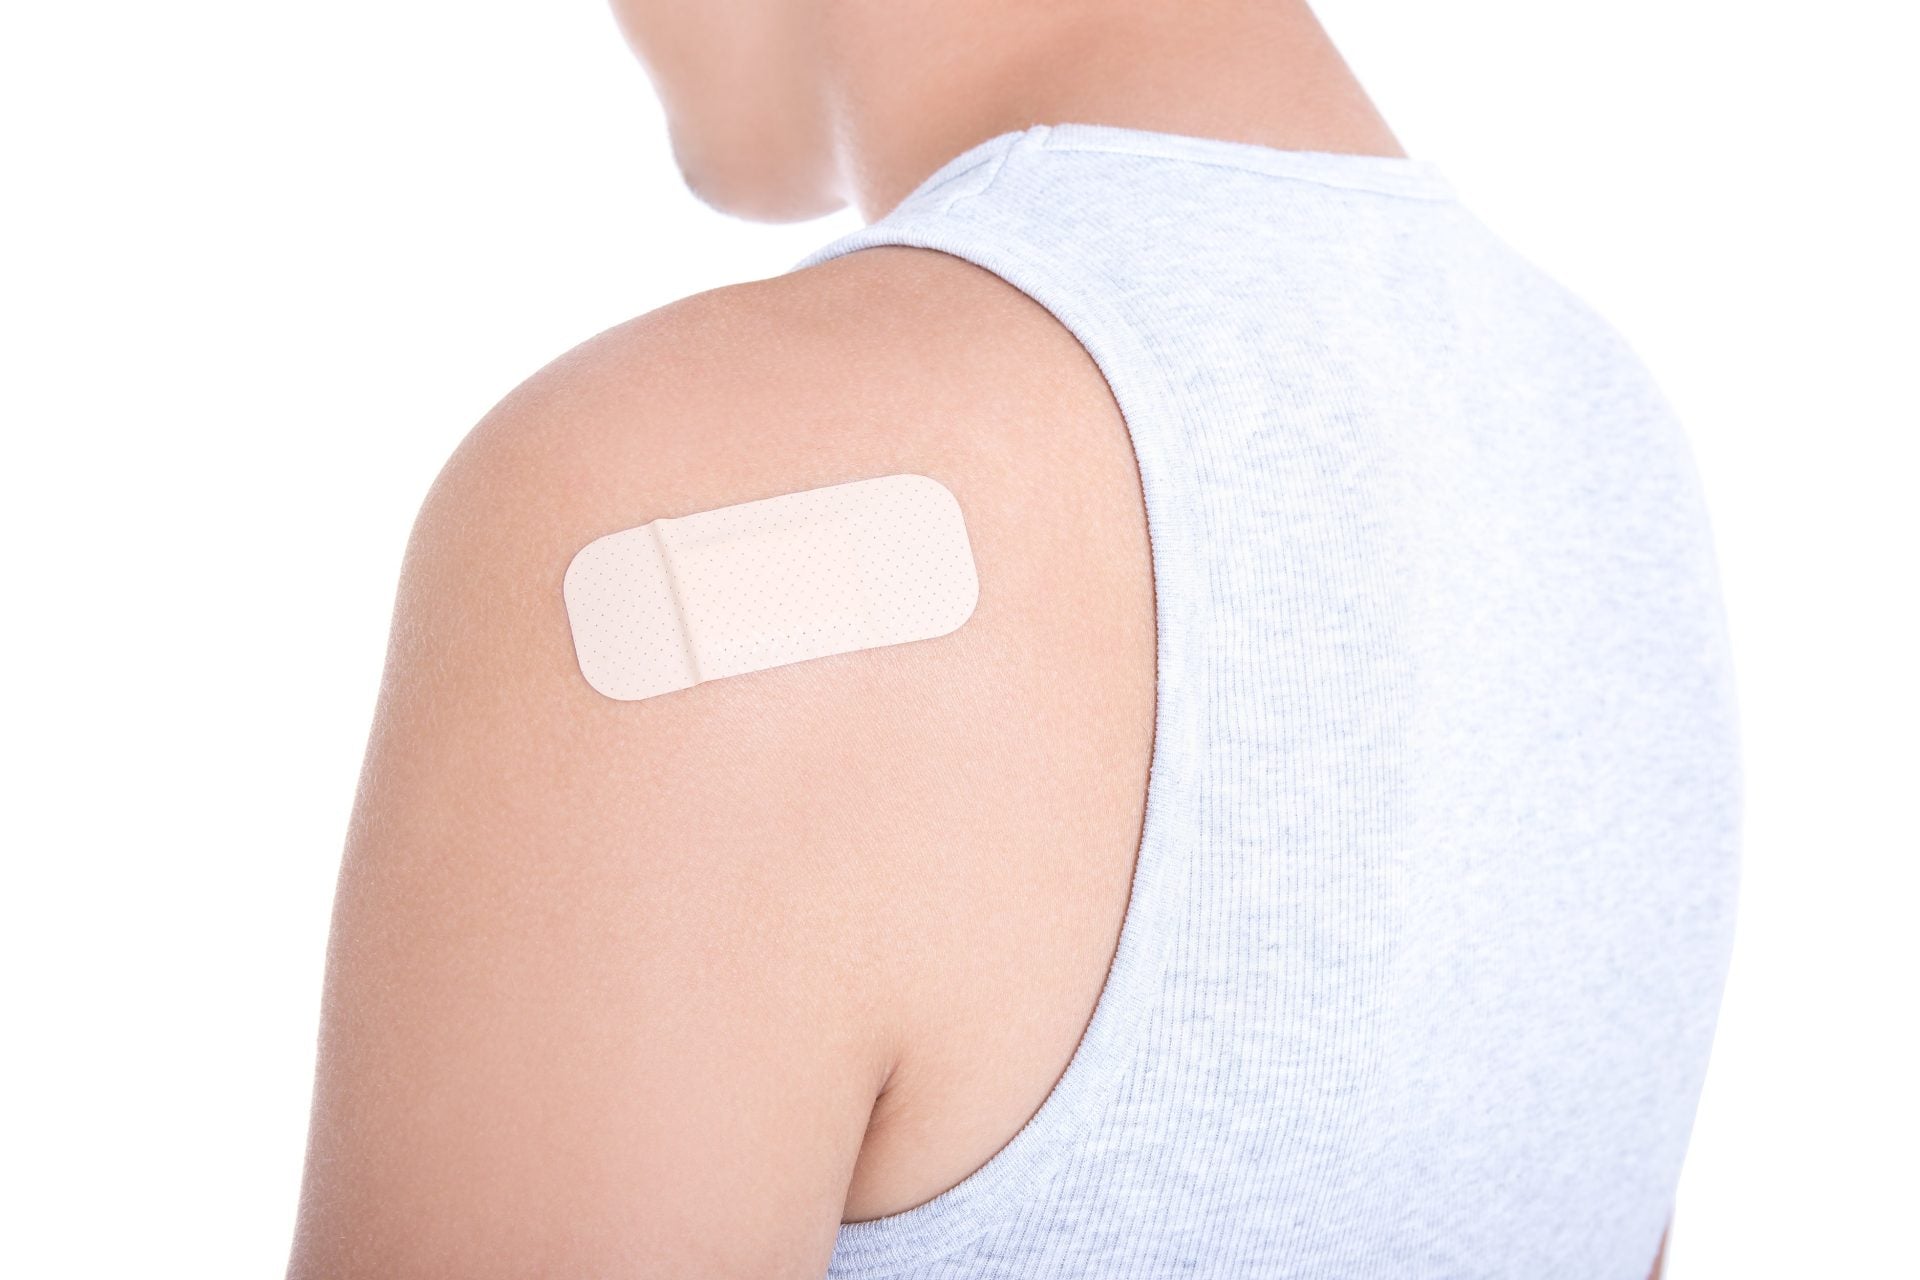 What Is a CBD Patch?